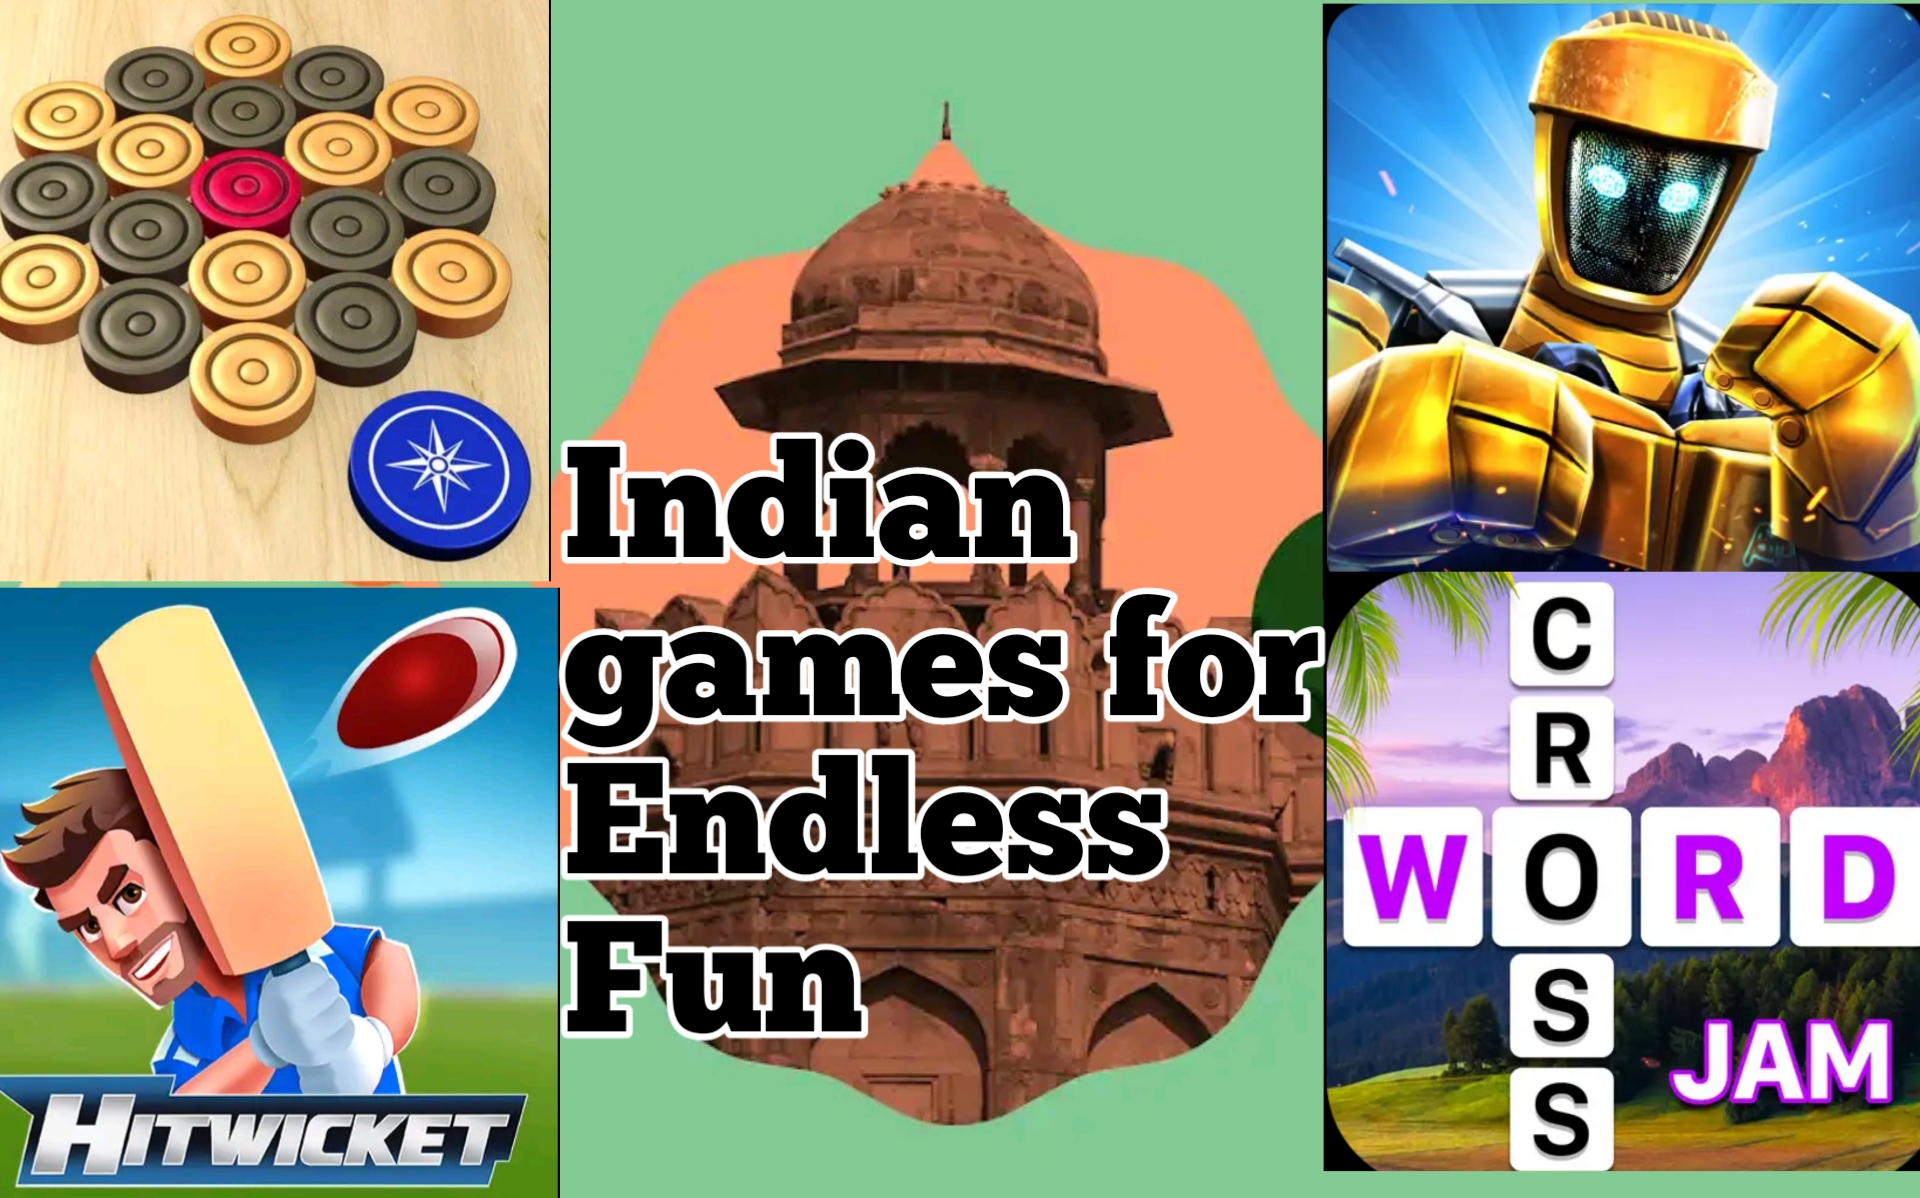 Indian games